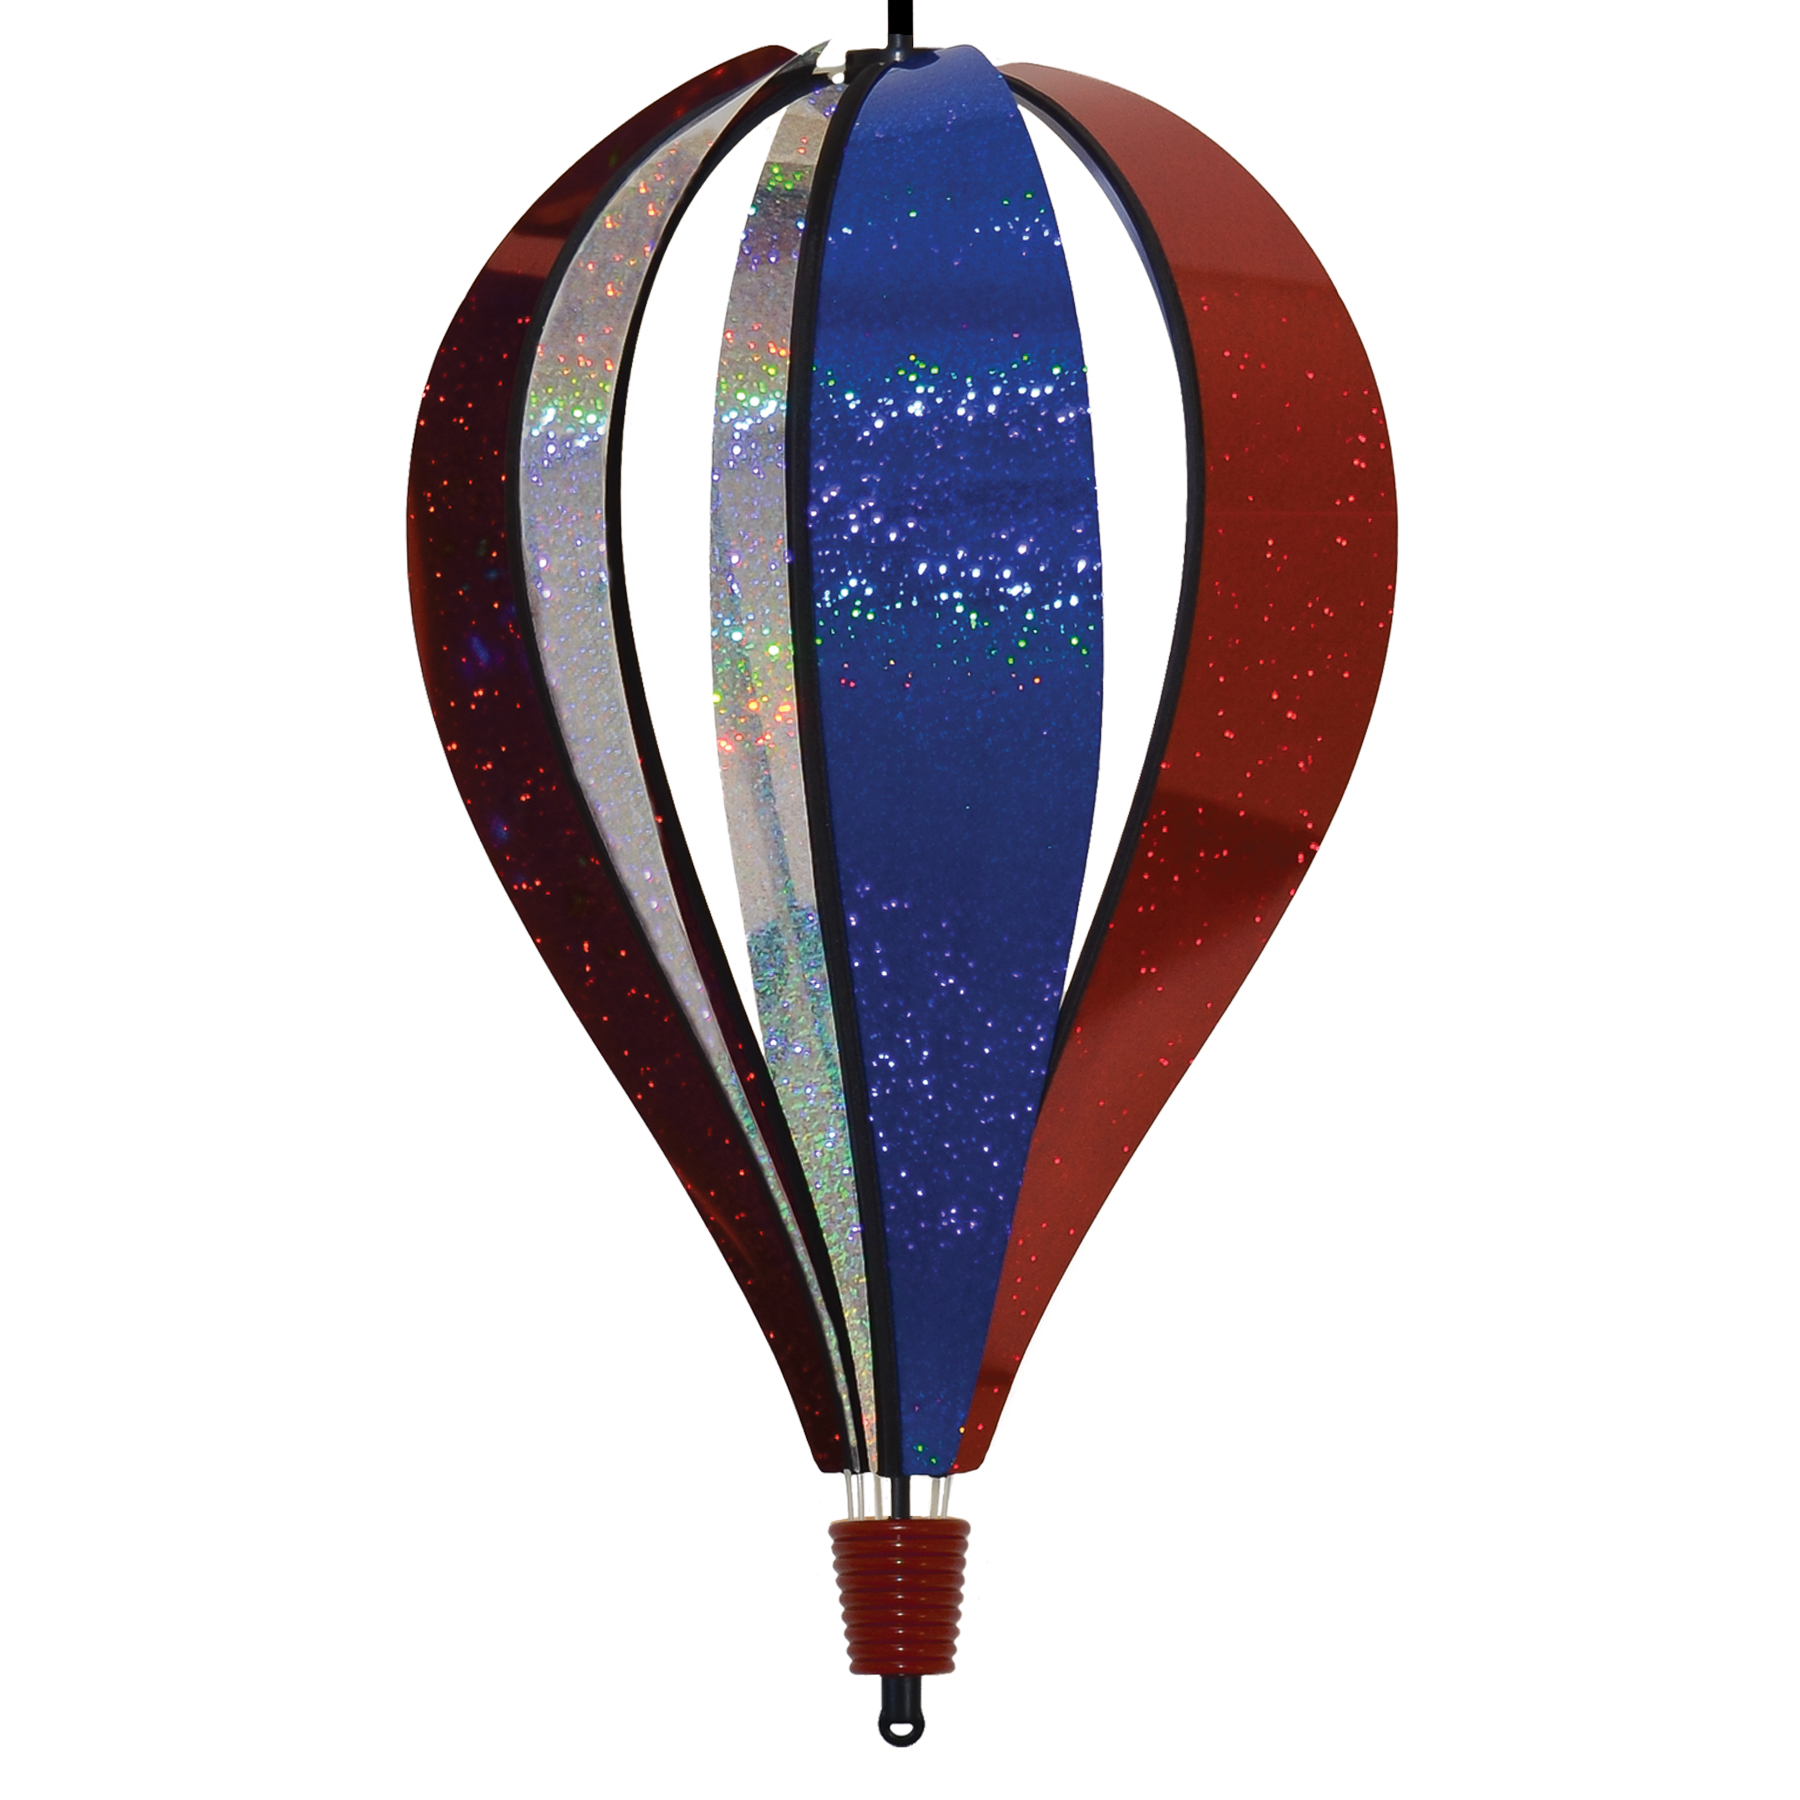 In the Breeze 1084 — Patriot Sparkler 6 Panel Hot Air Balloon 12"W x 18"H x 12"D, Colorful Mylar Patriotic Garden Spinner - image 1 of 4